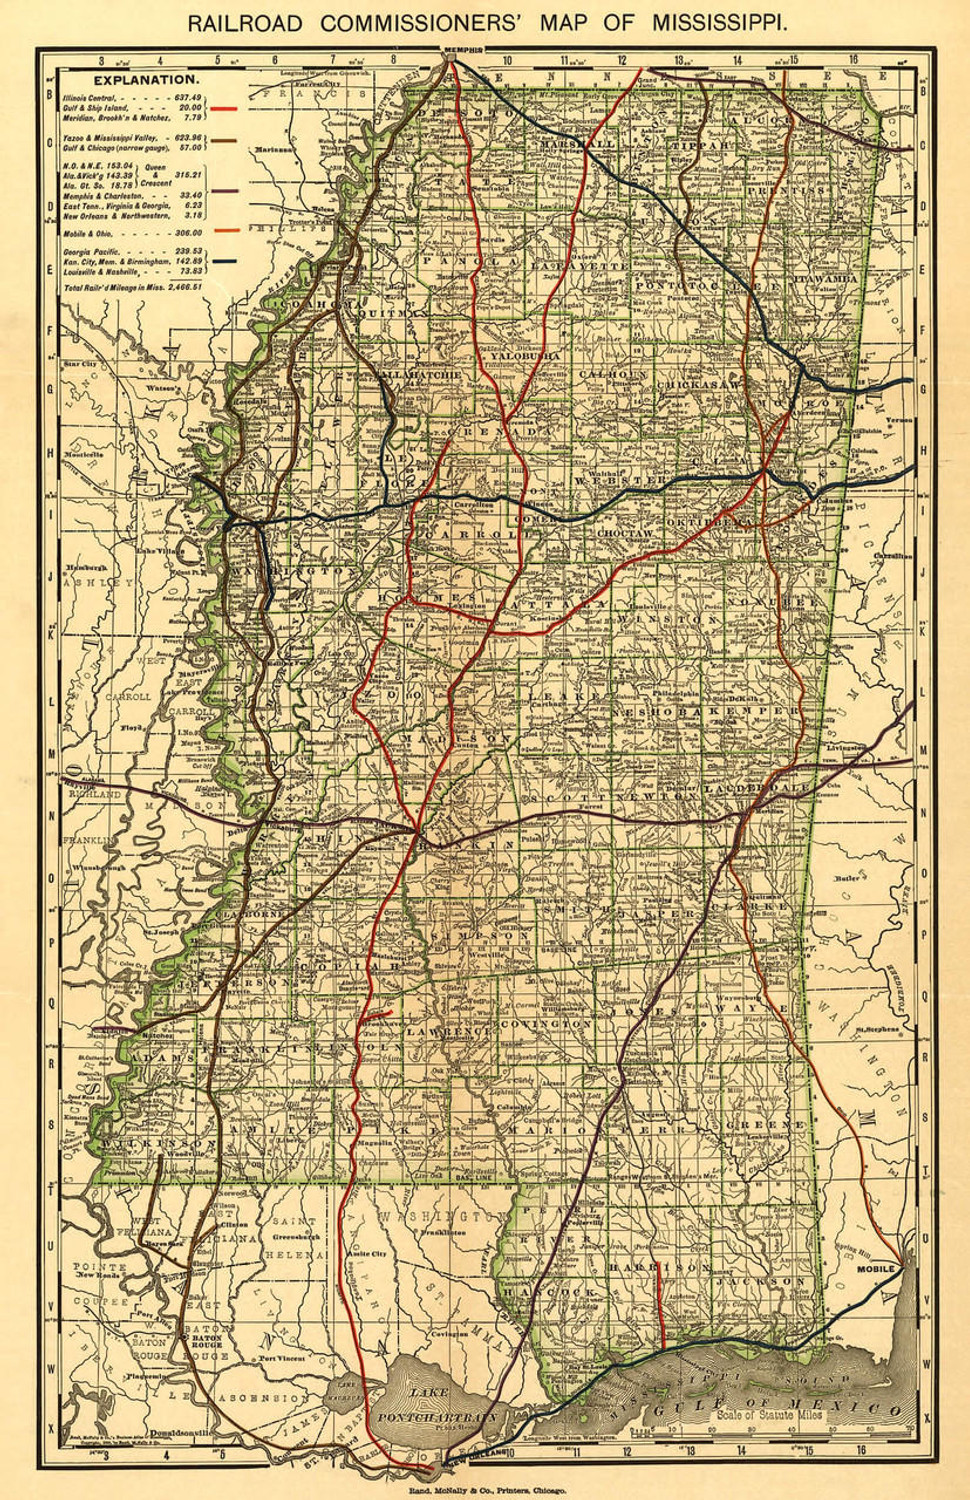 Historic Railroad Map of Mississippi - 1888, image 1, World Maps Online